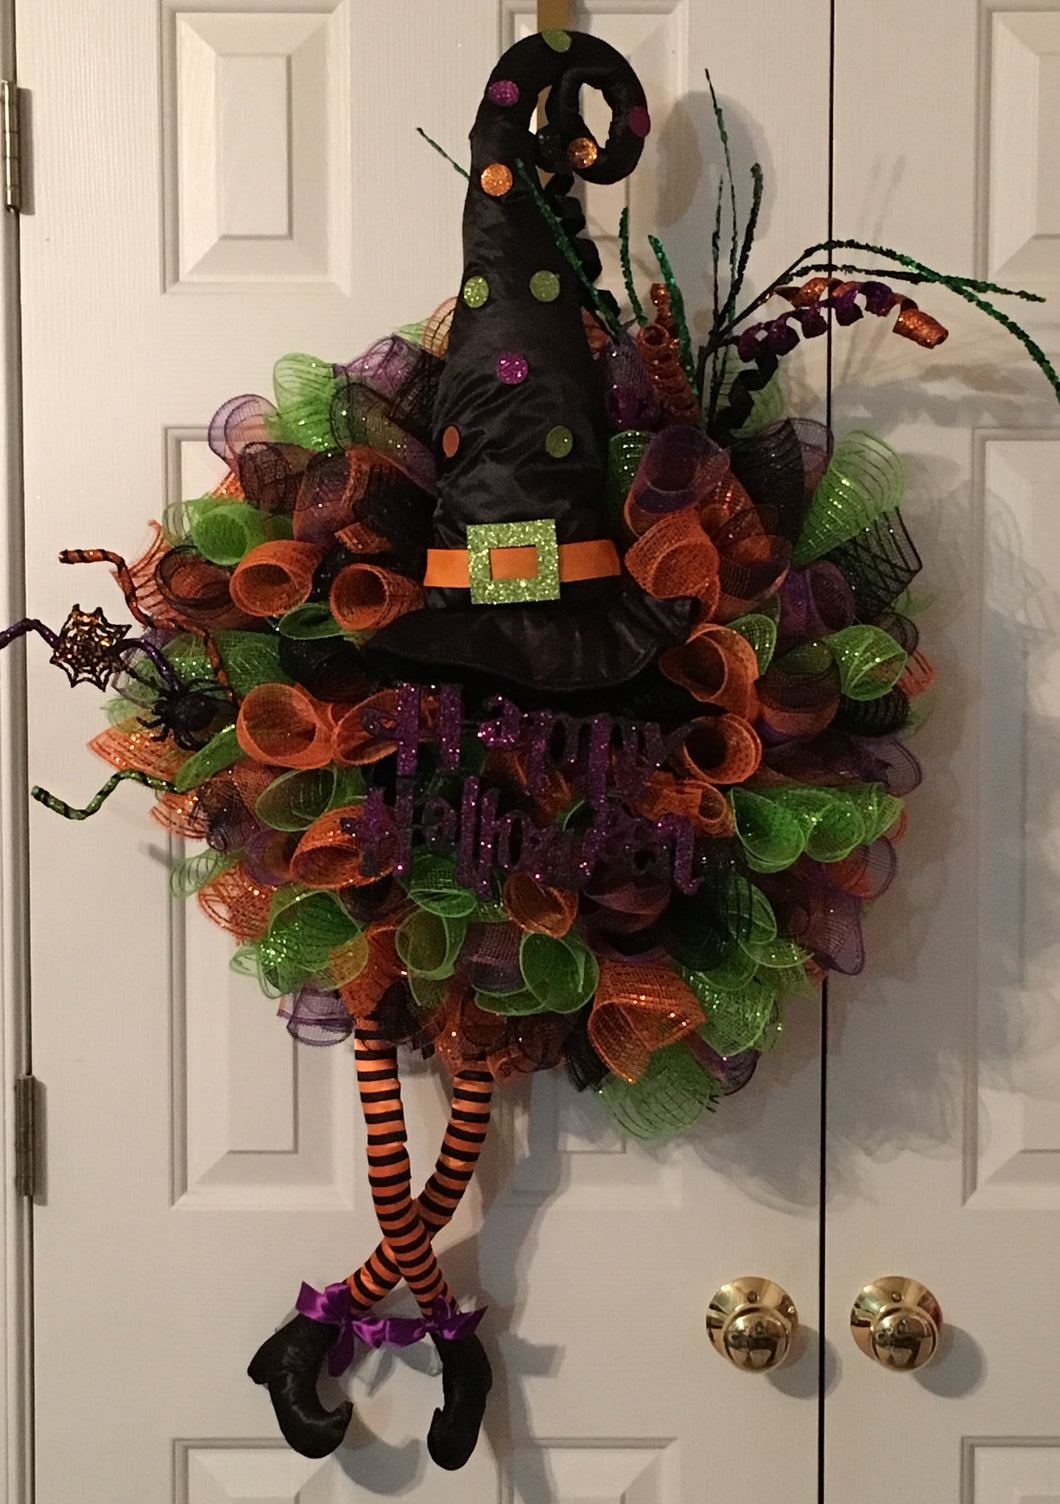 This Happy Halloween Wreath is a colorful mesh wreath perfect for any room, door, or wall. It's the kind of wreath that welcomes all your ghoulish friends with vibrant colors. It's bright and decorated with a witch's hat, witches' legs, and a variety of embellishments and colorful mesh. It measures approximately 40